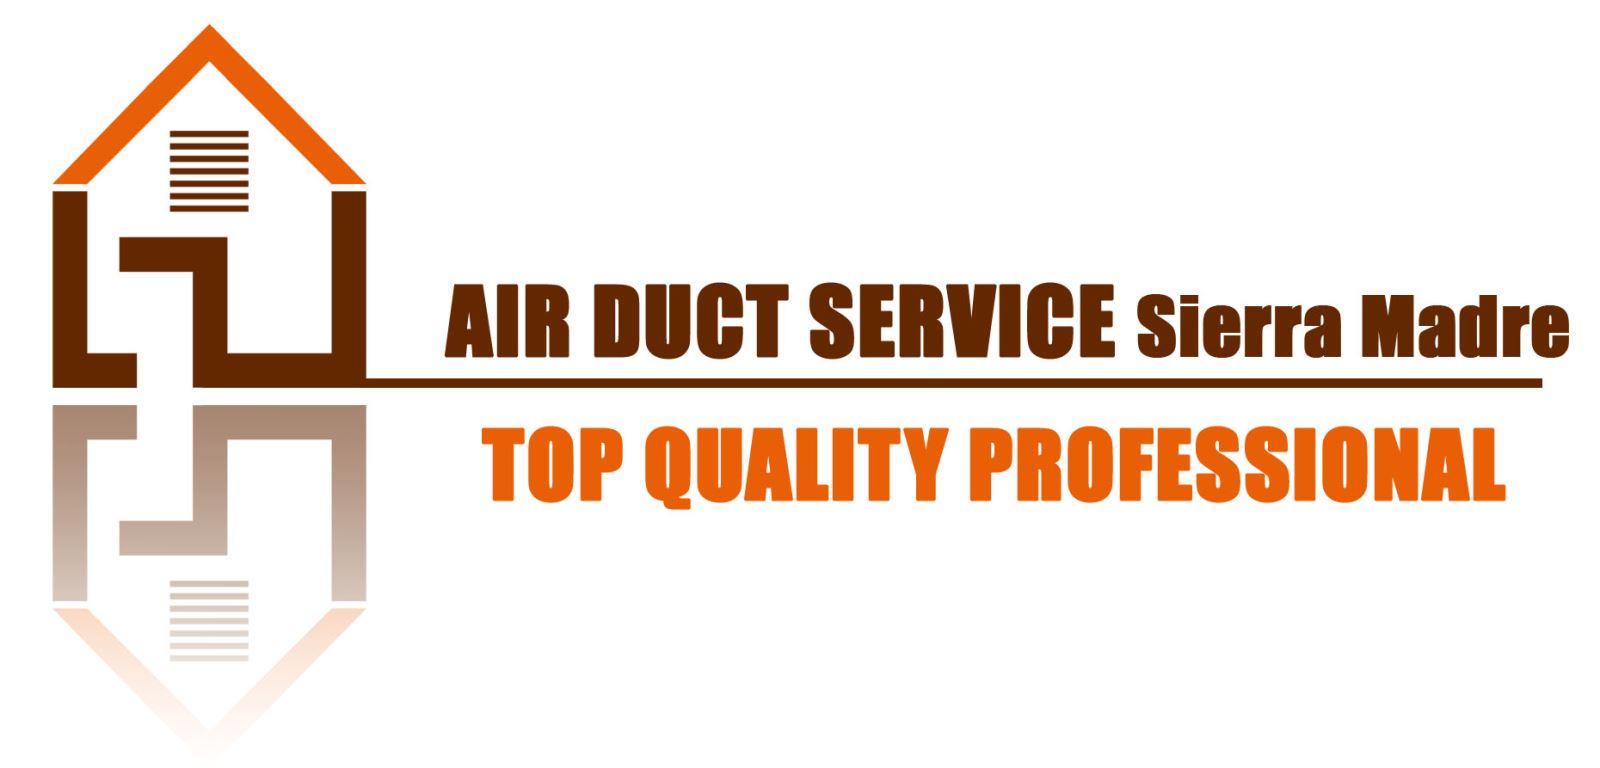 Air Duct Cleaning Sierra Madre,CA